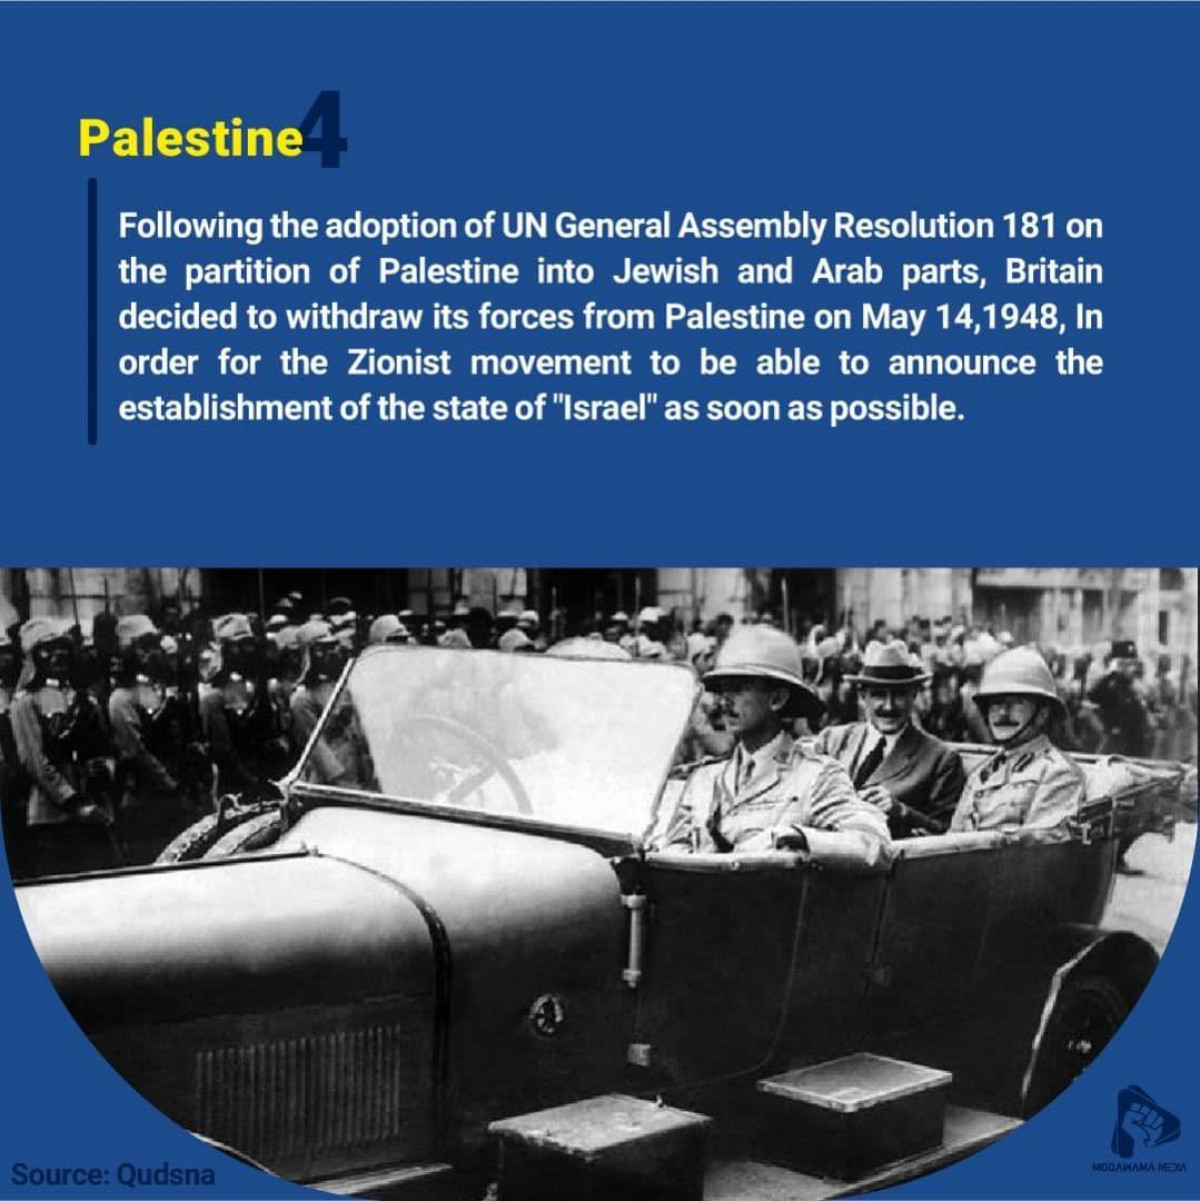 Following the adoption of UN General Assembly Resolution 181 on the partition of Palestine into Jewish and Arab parts